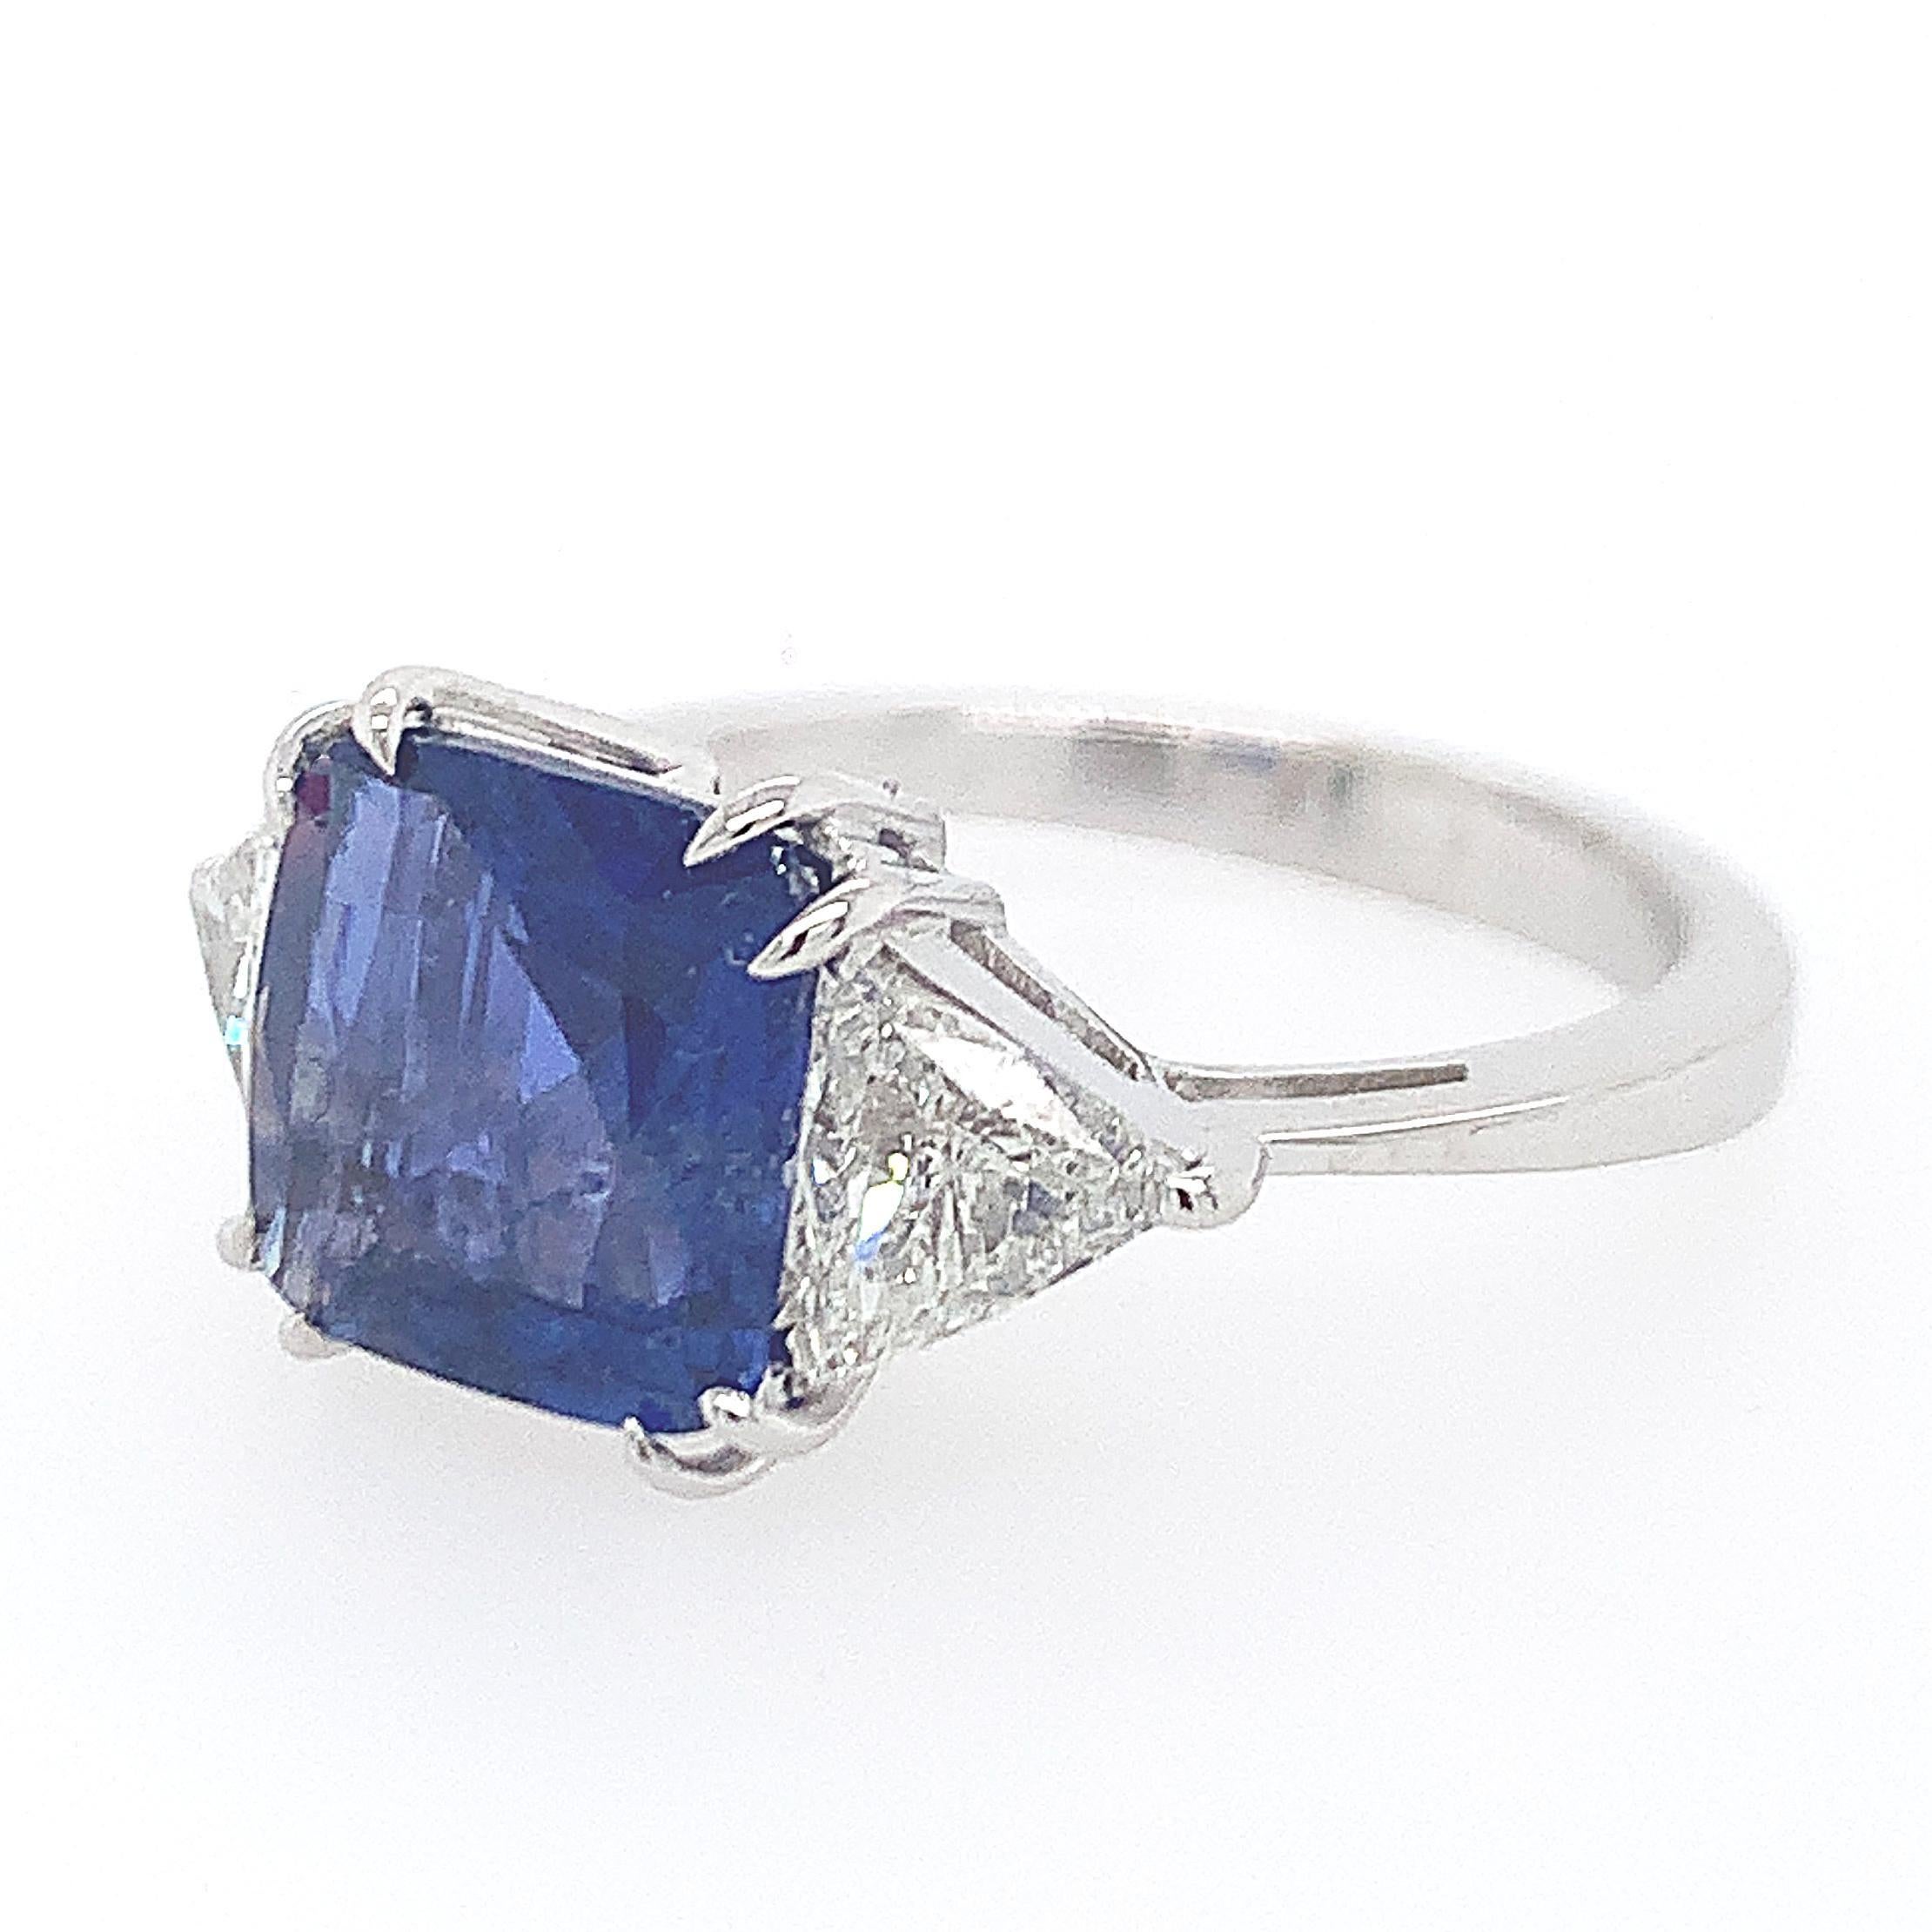 18K Y/gold Sapphire Diamond Engagement Ring, sapphire weighing approx. 3.00 cts, flanked by two trillon cut diamonds weighing approx. 0.65 cts, GH VS, stamps 750, ring size 7, weight 3.3 dwt